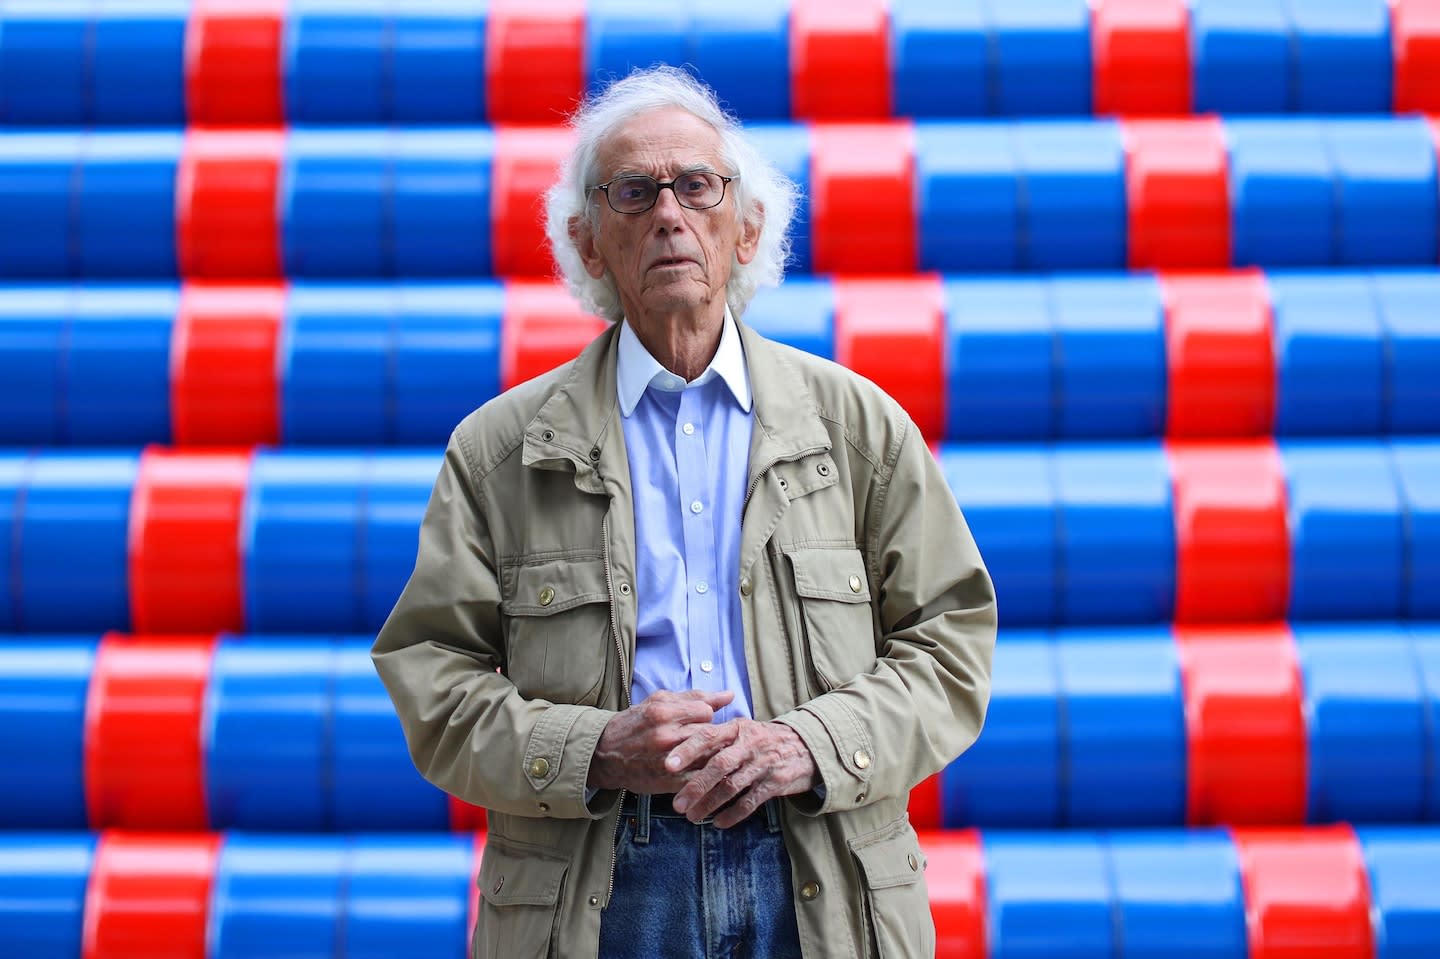 Christo, audacious artist who wrapped buildings, parks and landscapes in cloth, dies at 84